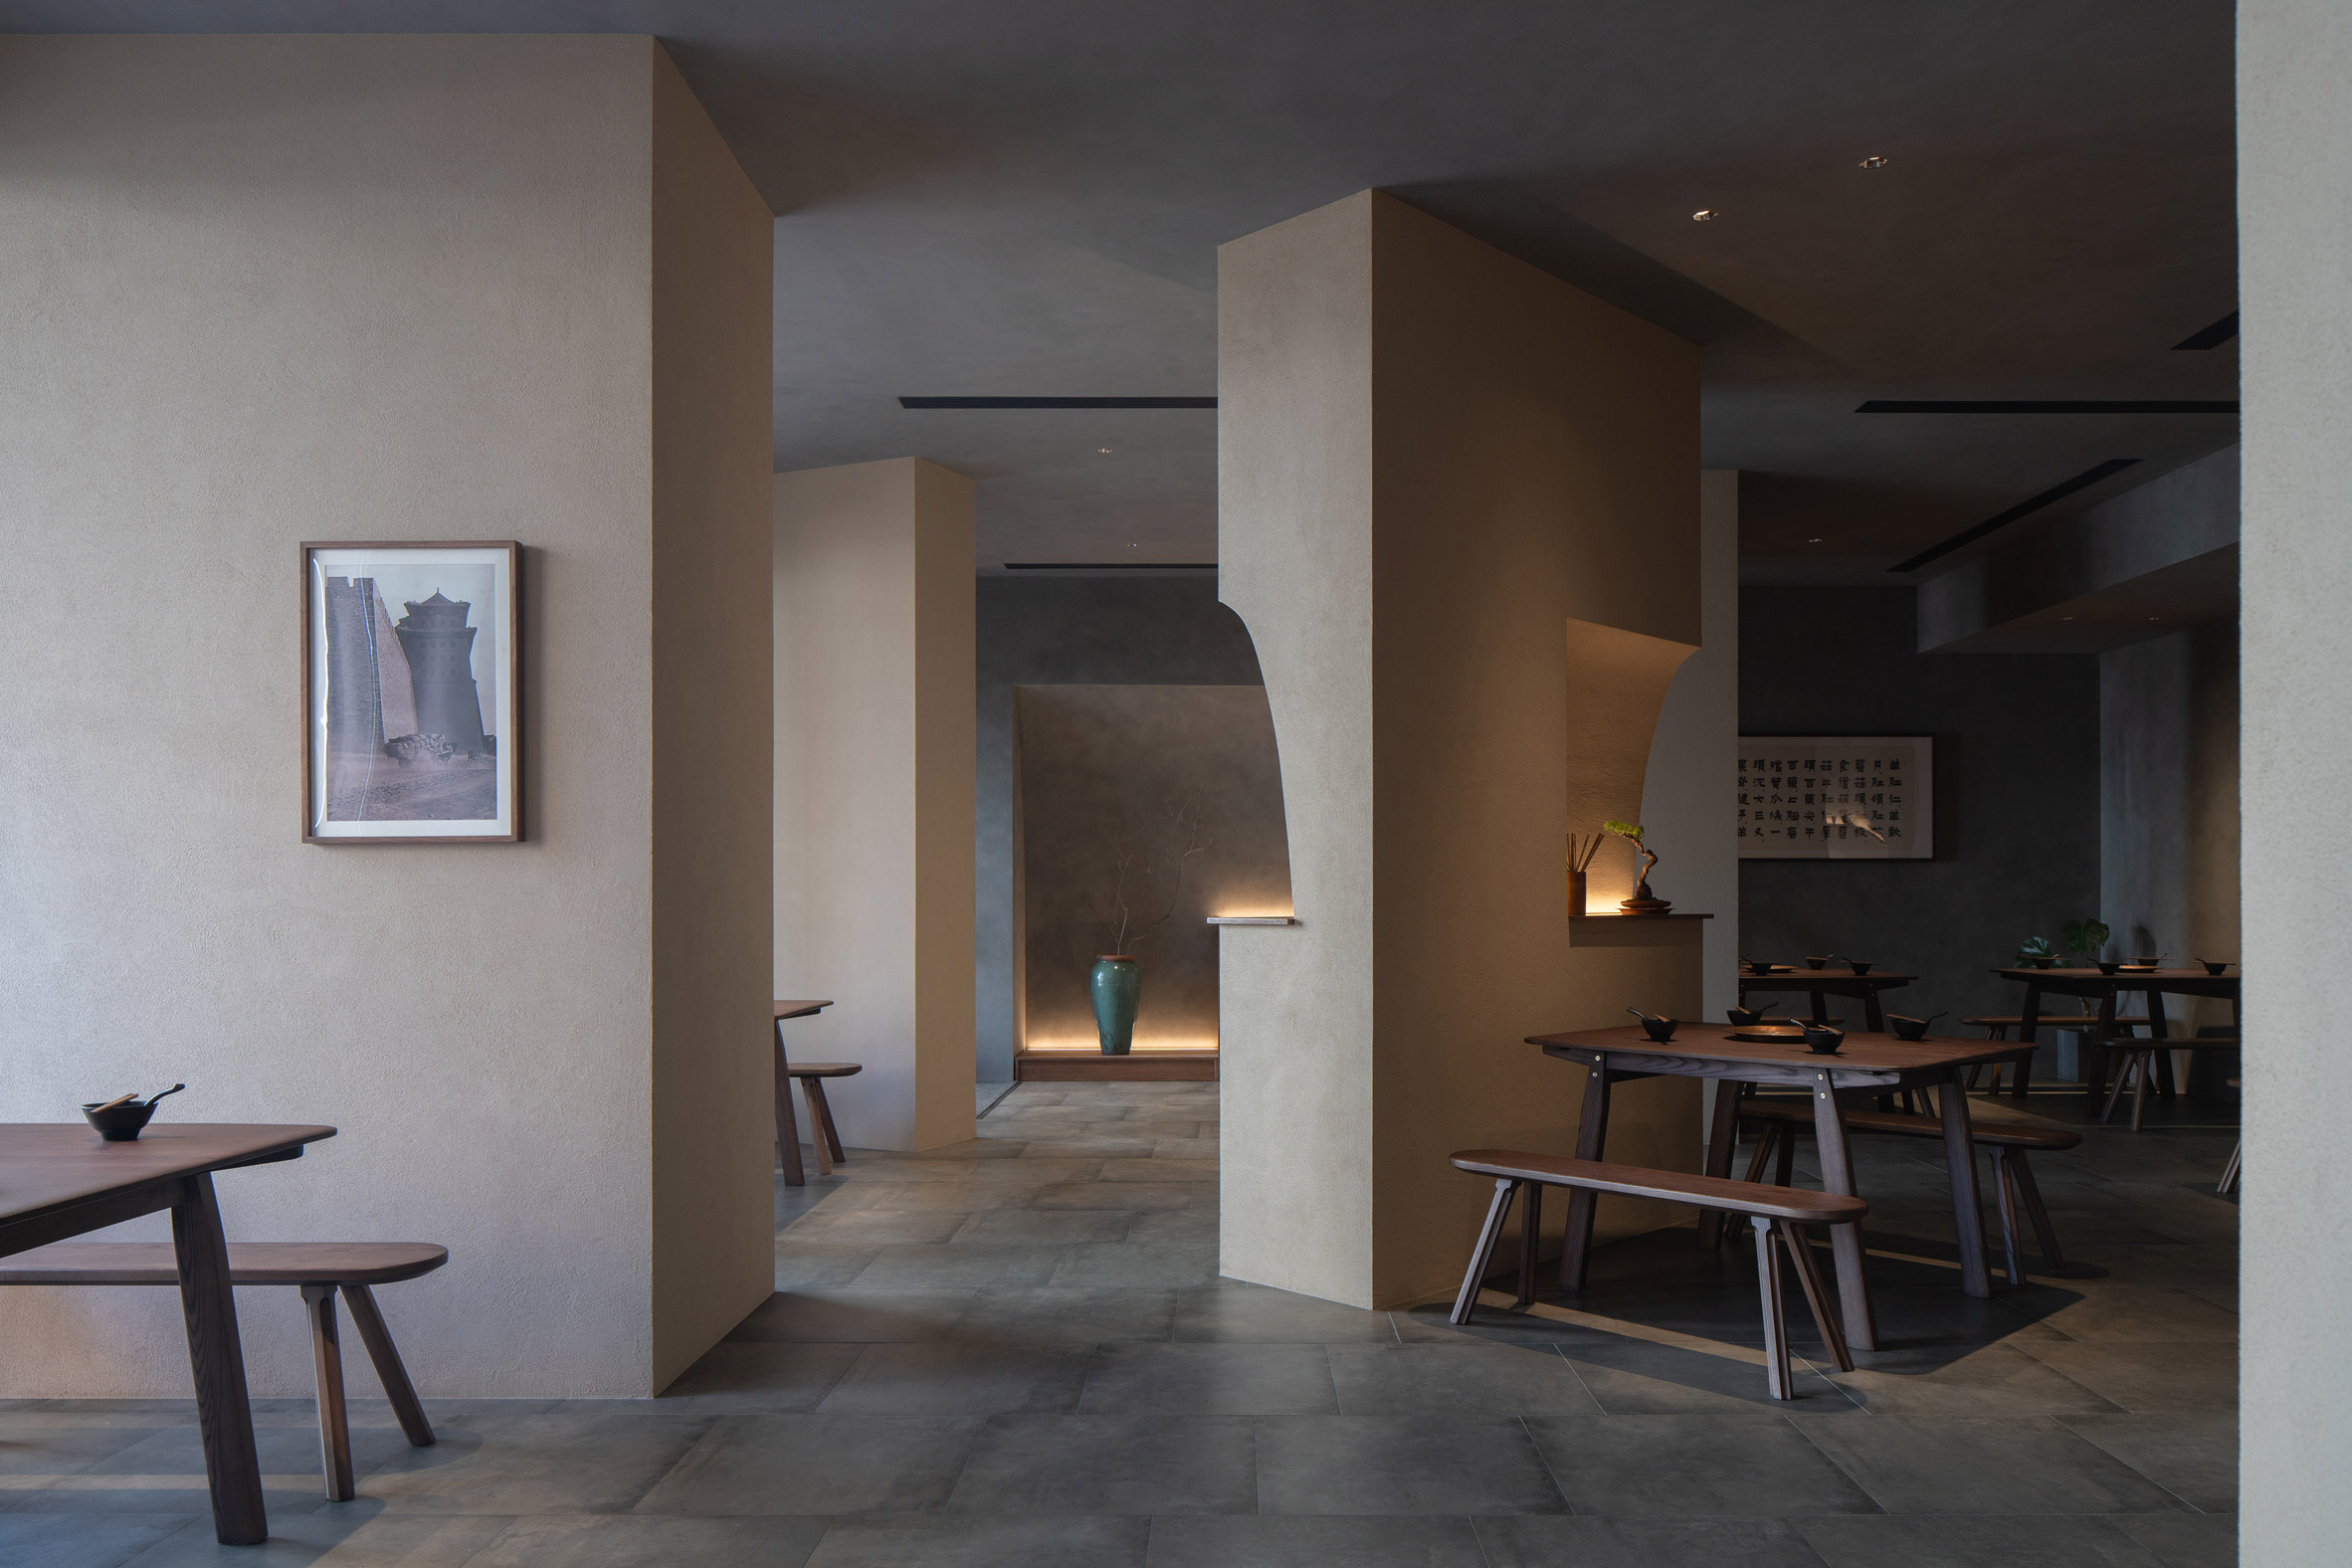 Seating nooks arranged around angled stucco walls in Jin Sheng Long restaurant